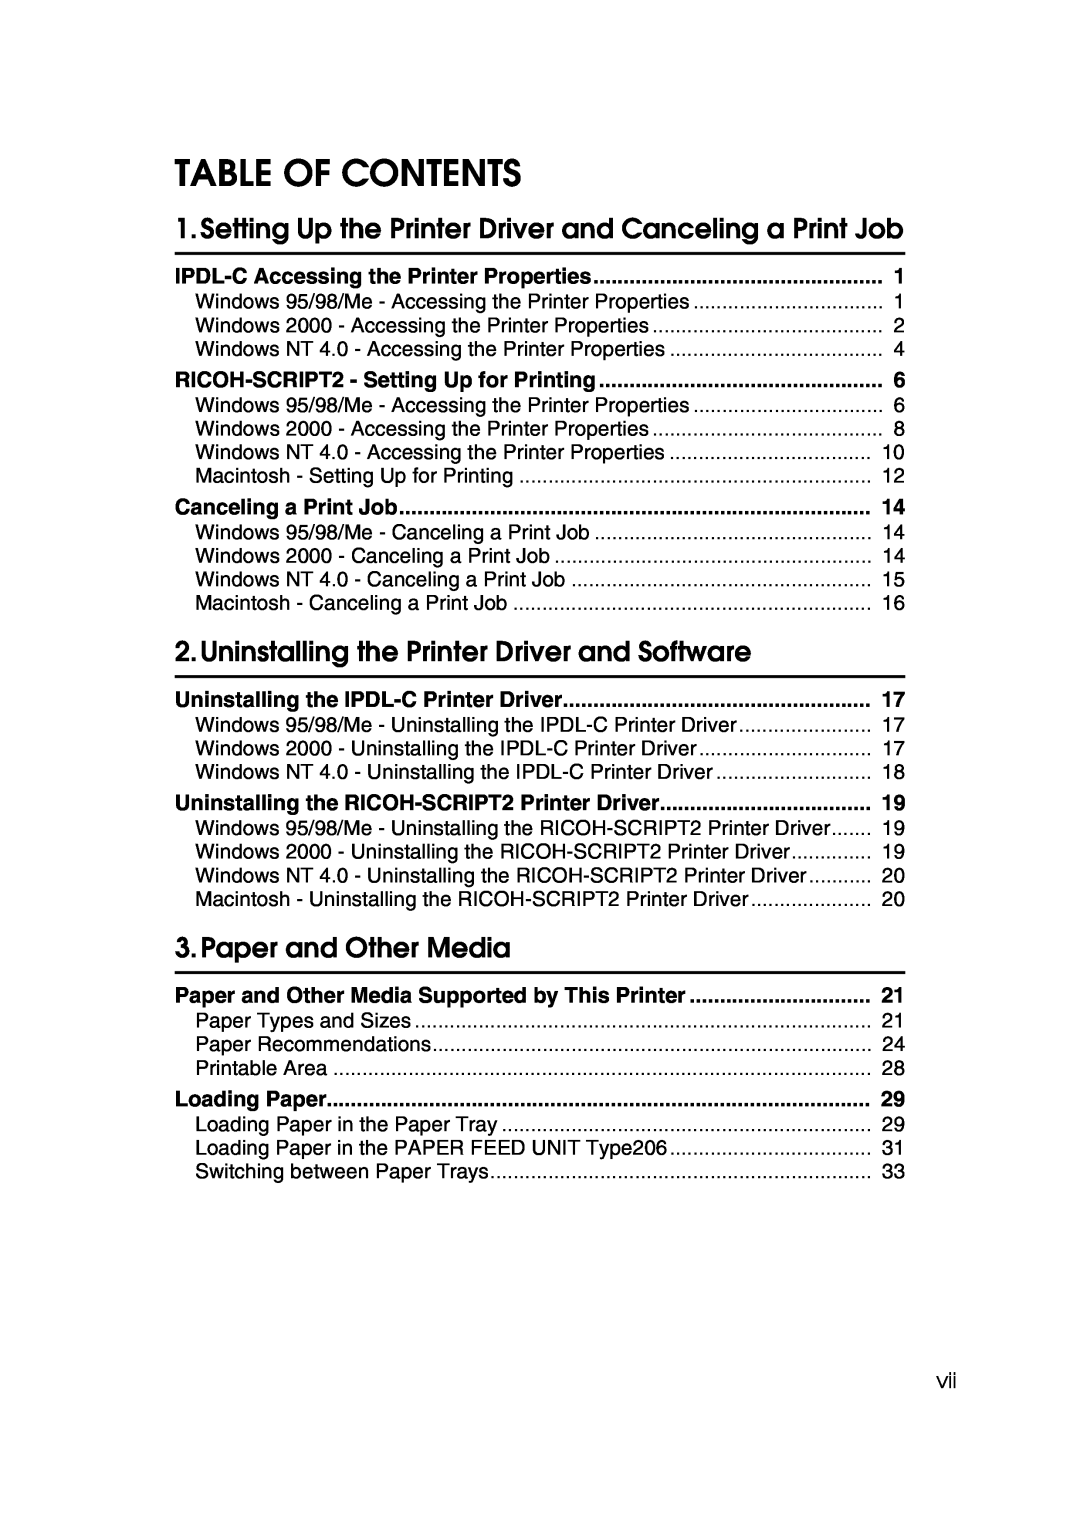 Lanier AP206 manual Table Of Contents, Setting Up the Printer Driver and Canceling a Print Job, Paper and Other Media 